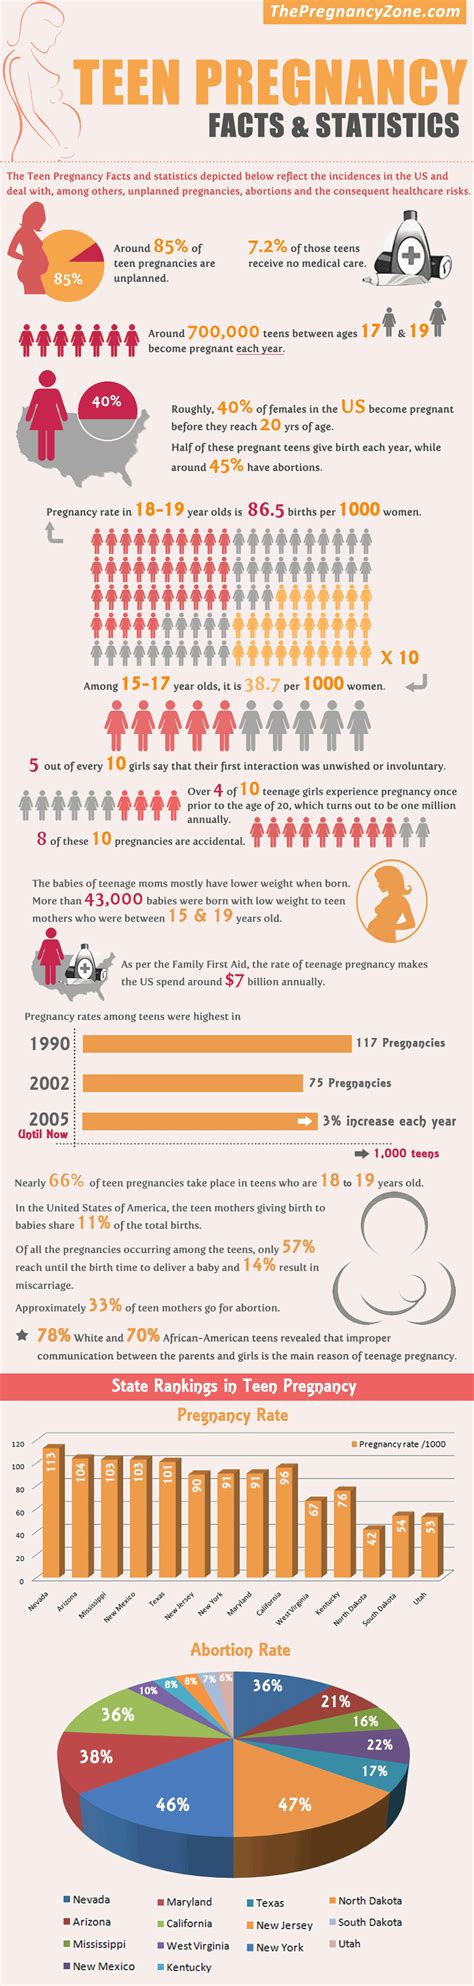 teen pregnancy facts and statistics [infographic]